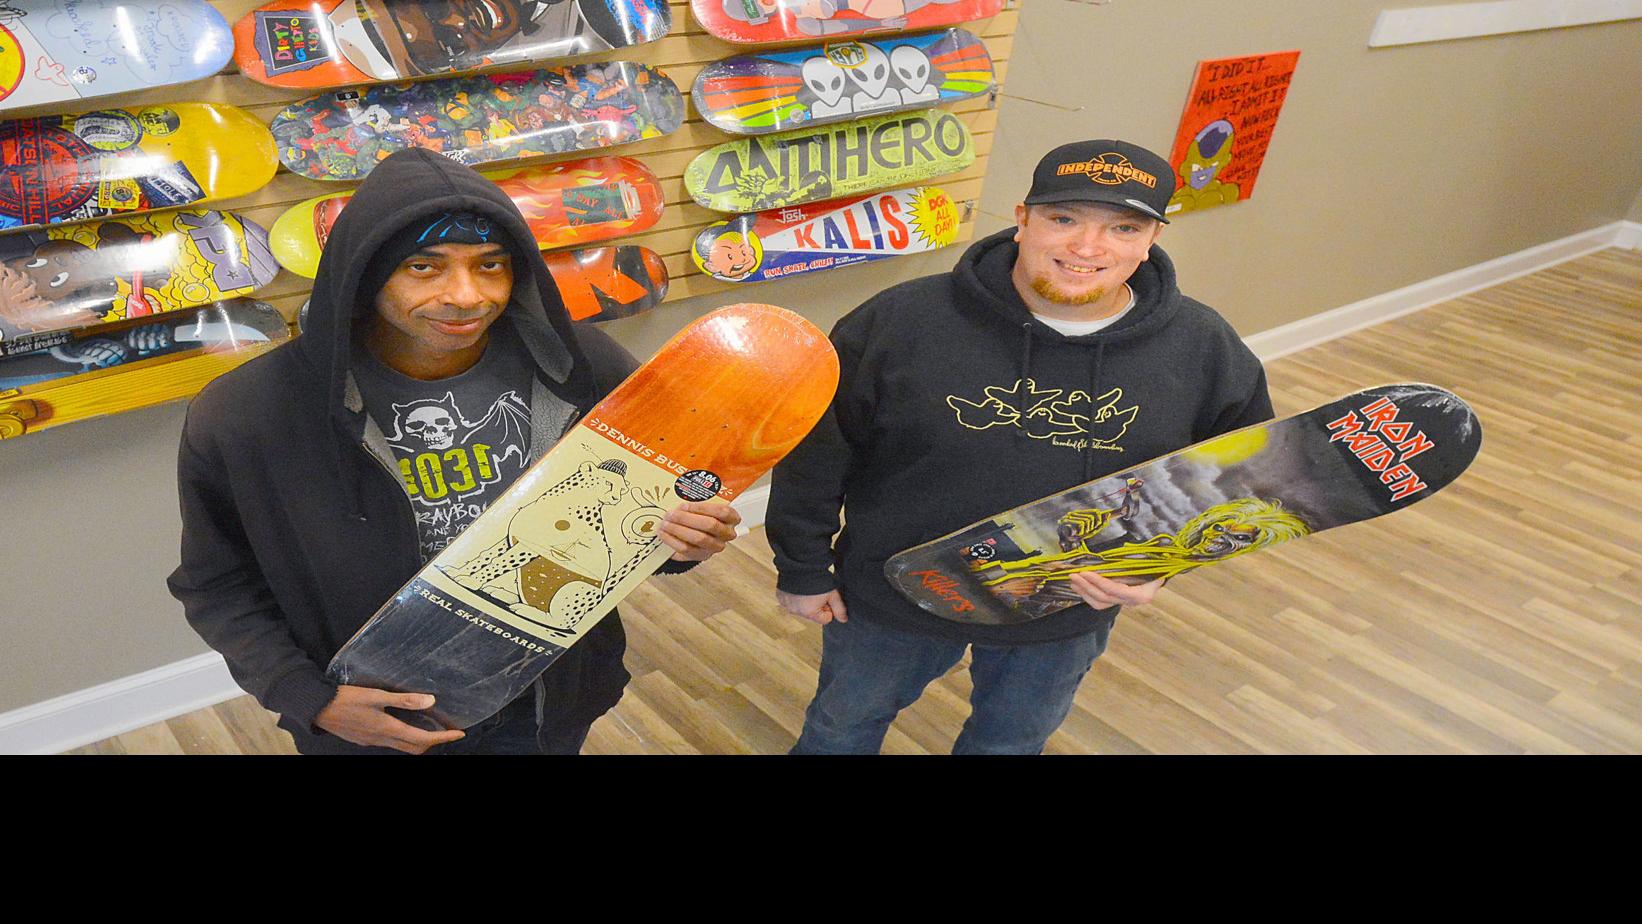 owner hopes to bring skateboarding passion to community | Hdr | hickoryrecord.com